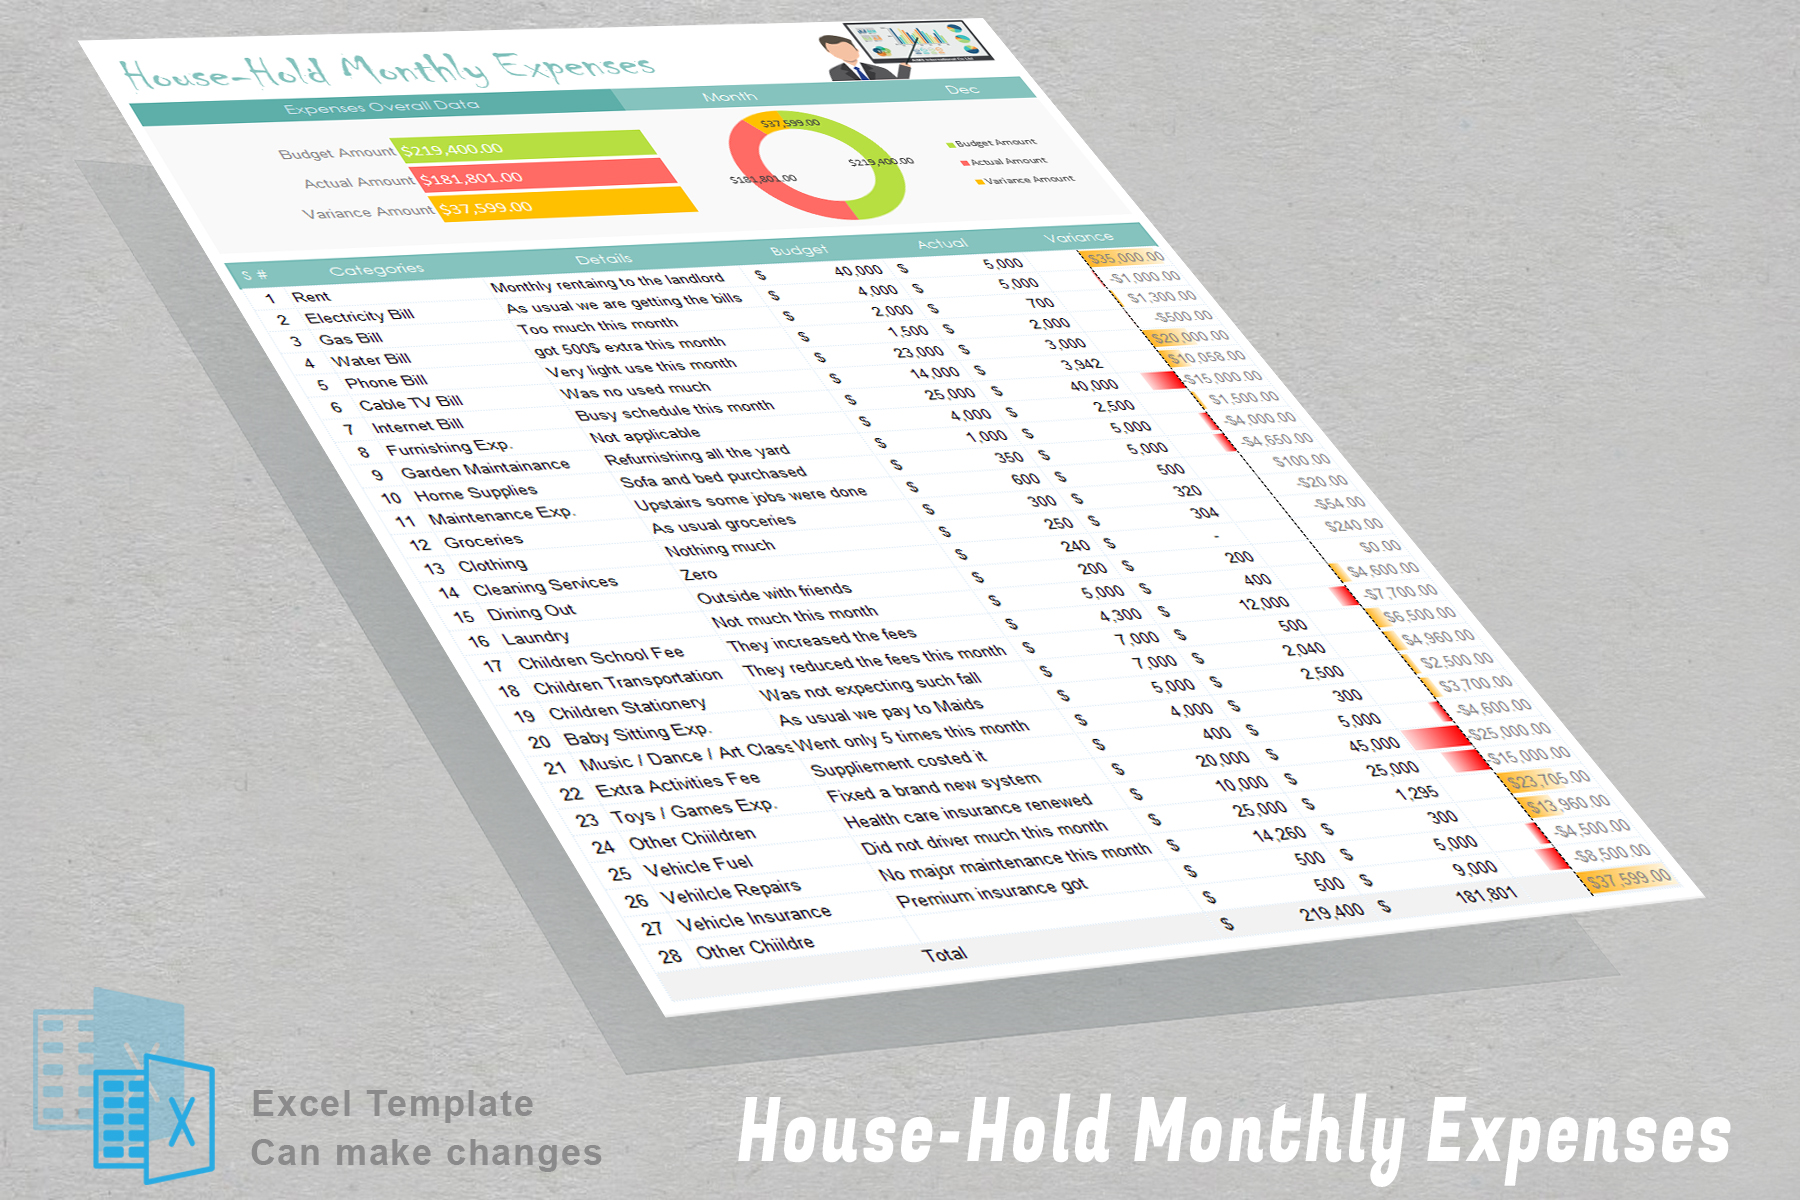 House holding Expenses Tracking Template